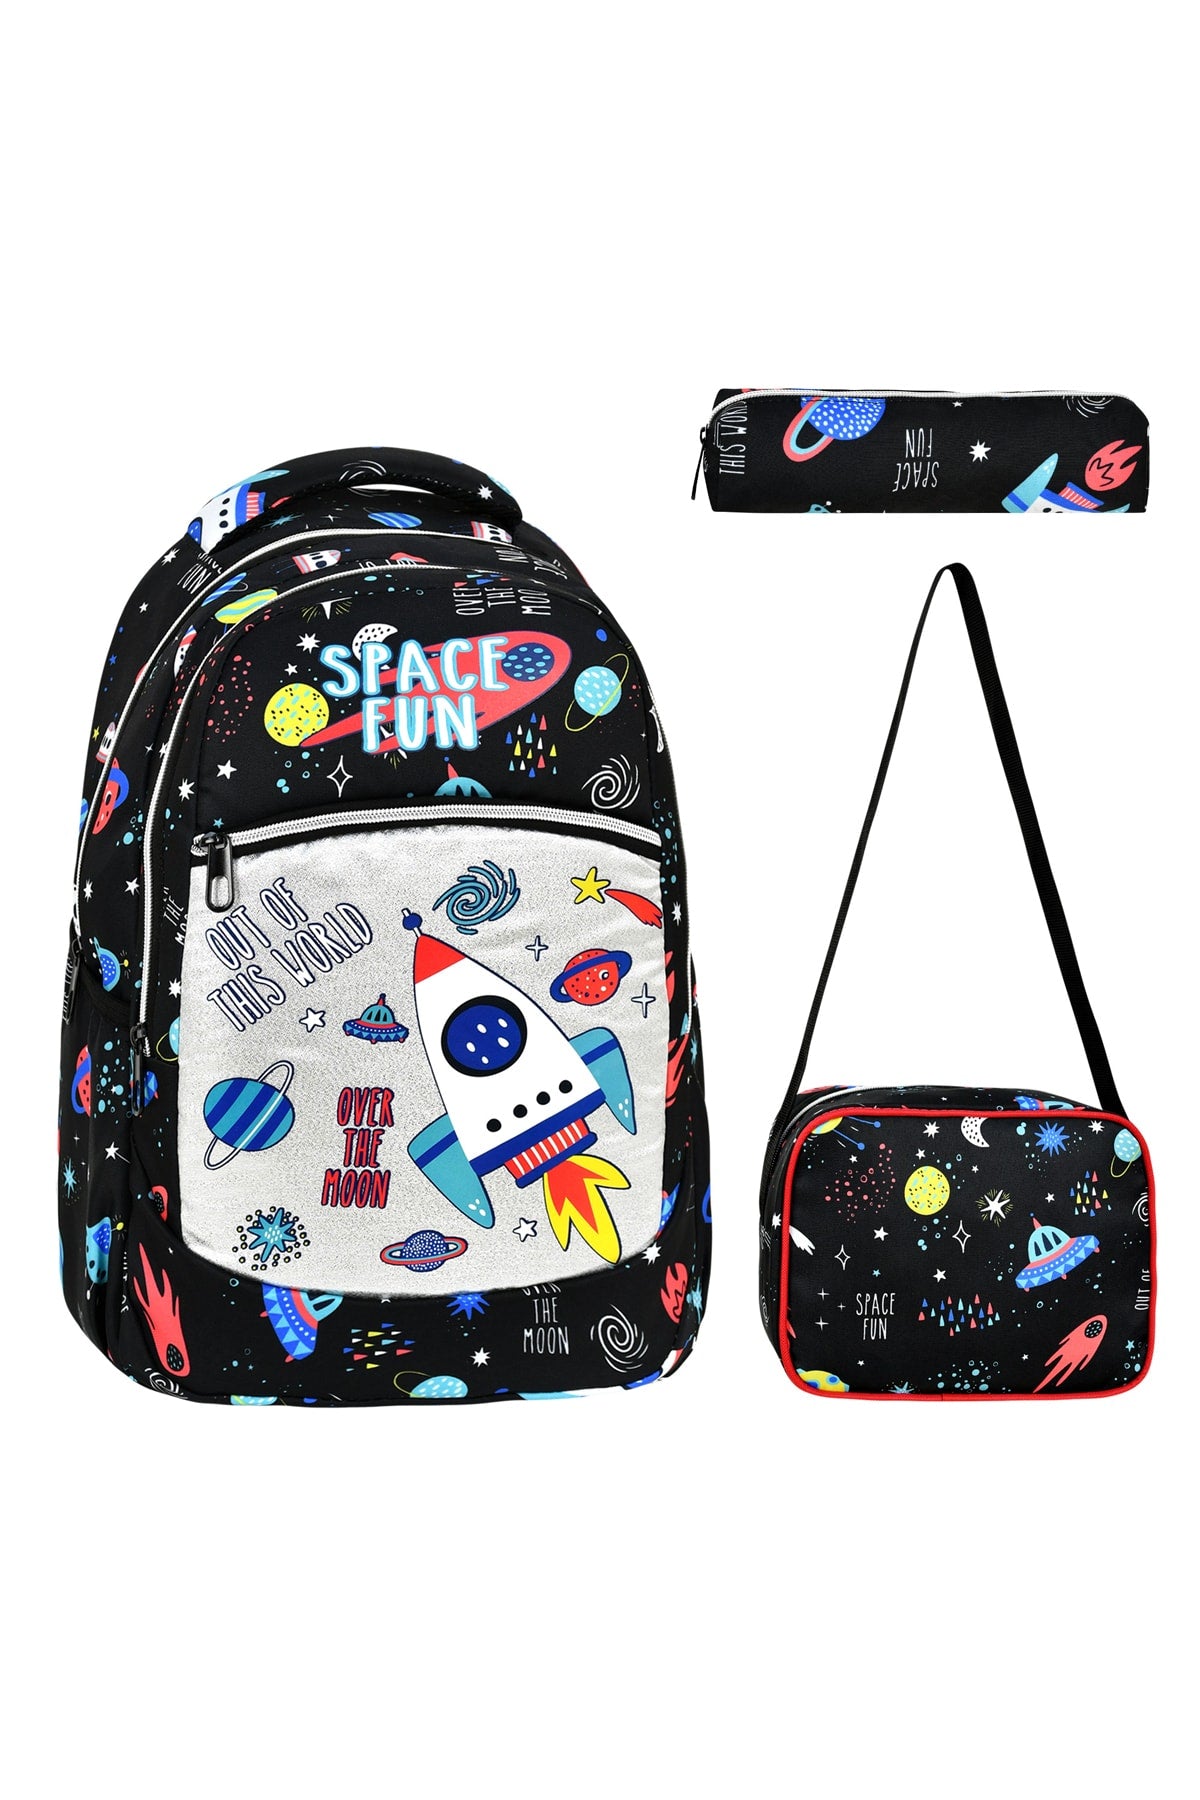 3-pack Elementary School Space Patterned, Waterproof School Bag with Food and Pencil Holder for Boys